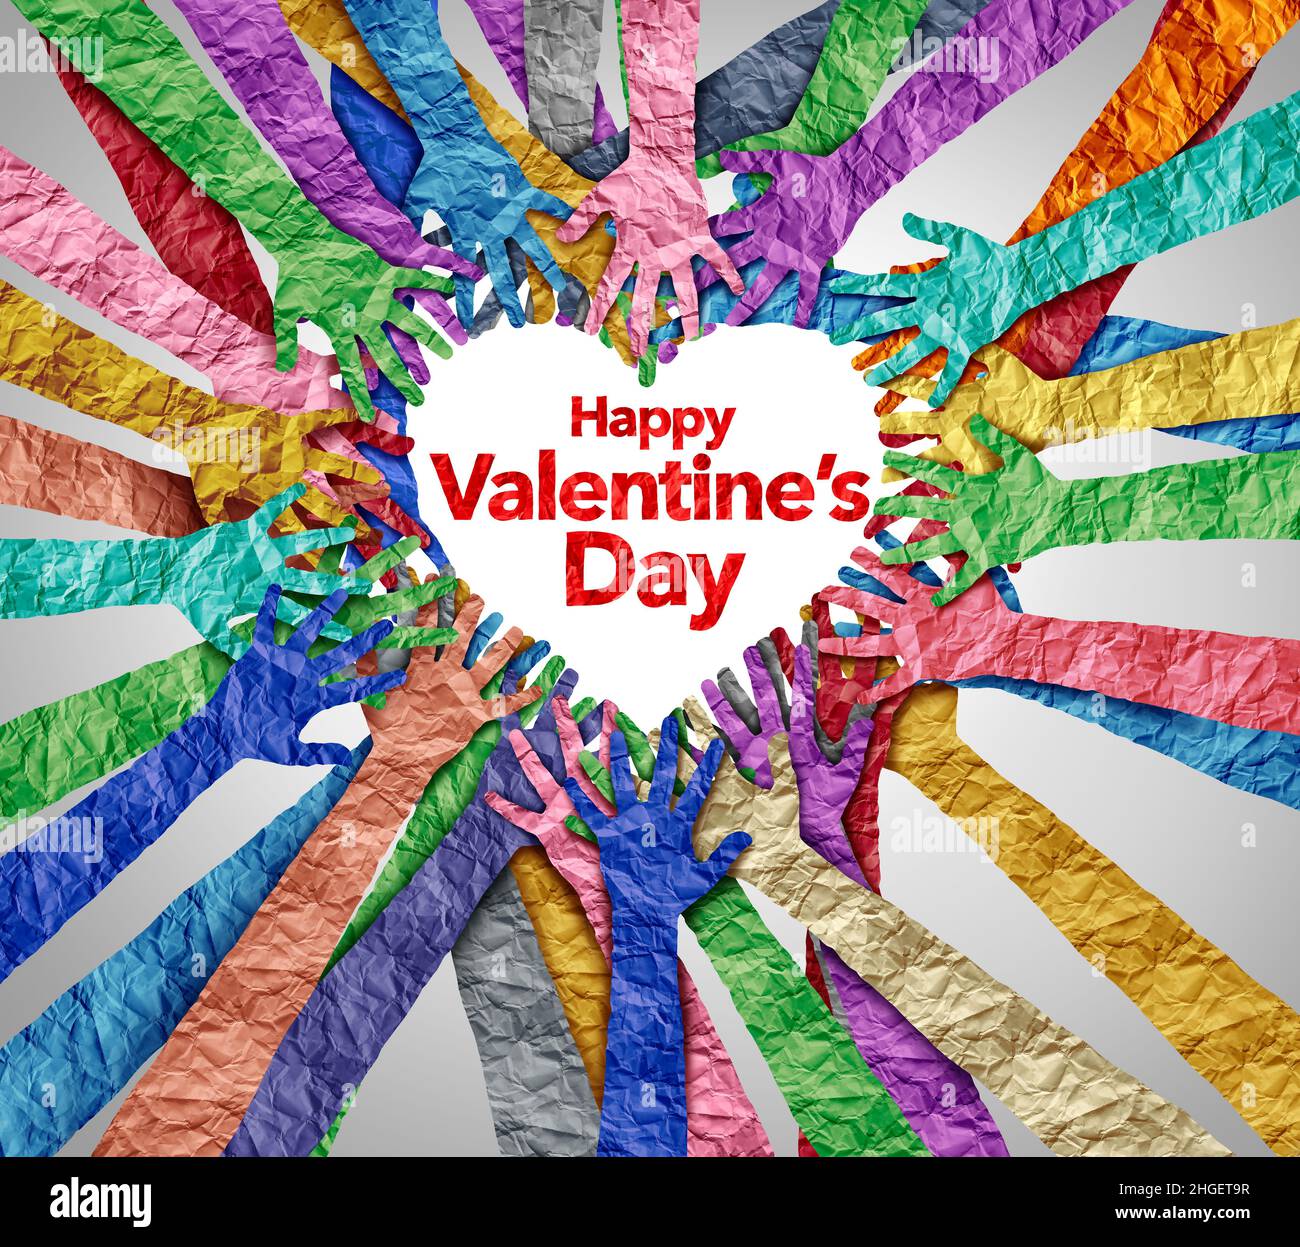 Happy Valentines day as a February love holiday with diverse hands celebrating affectionate emotions as a Saint Valentine greeting for romance and lov Stock Photo